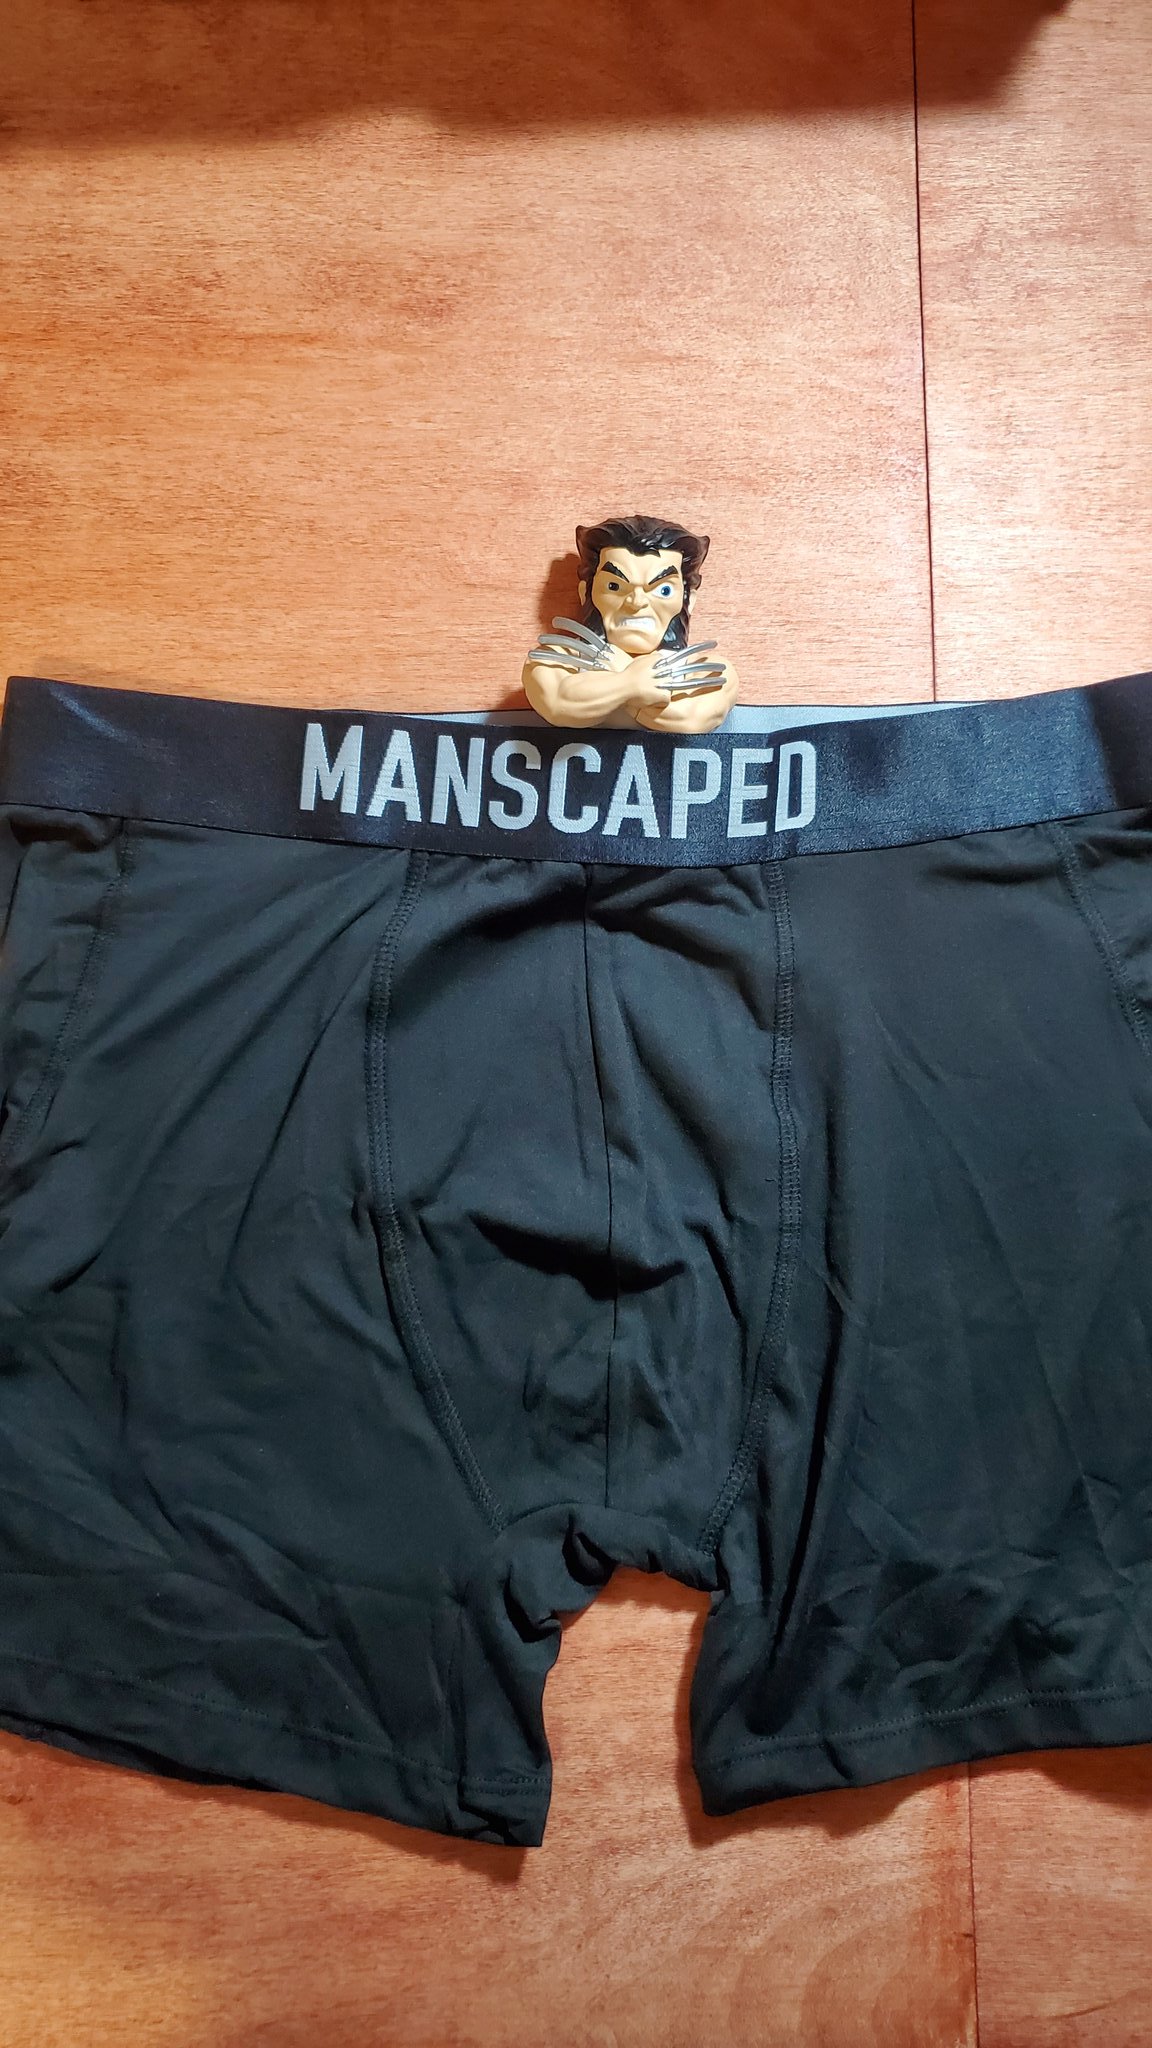 MANSCAPED® Boxers